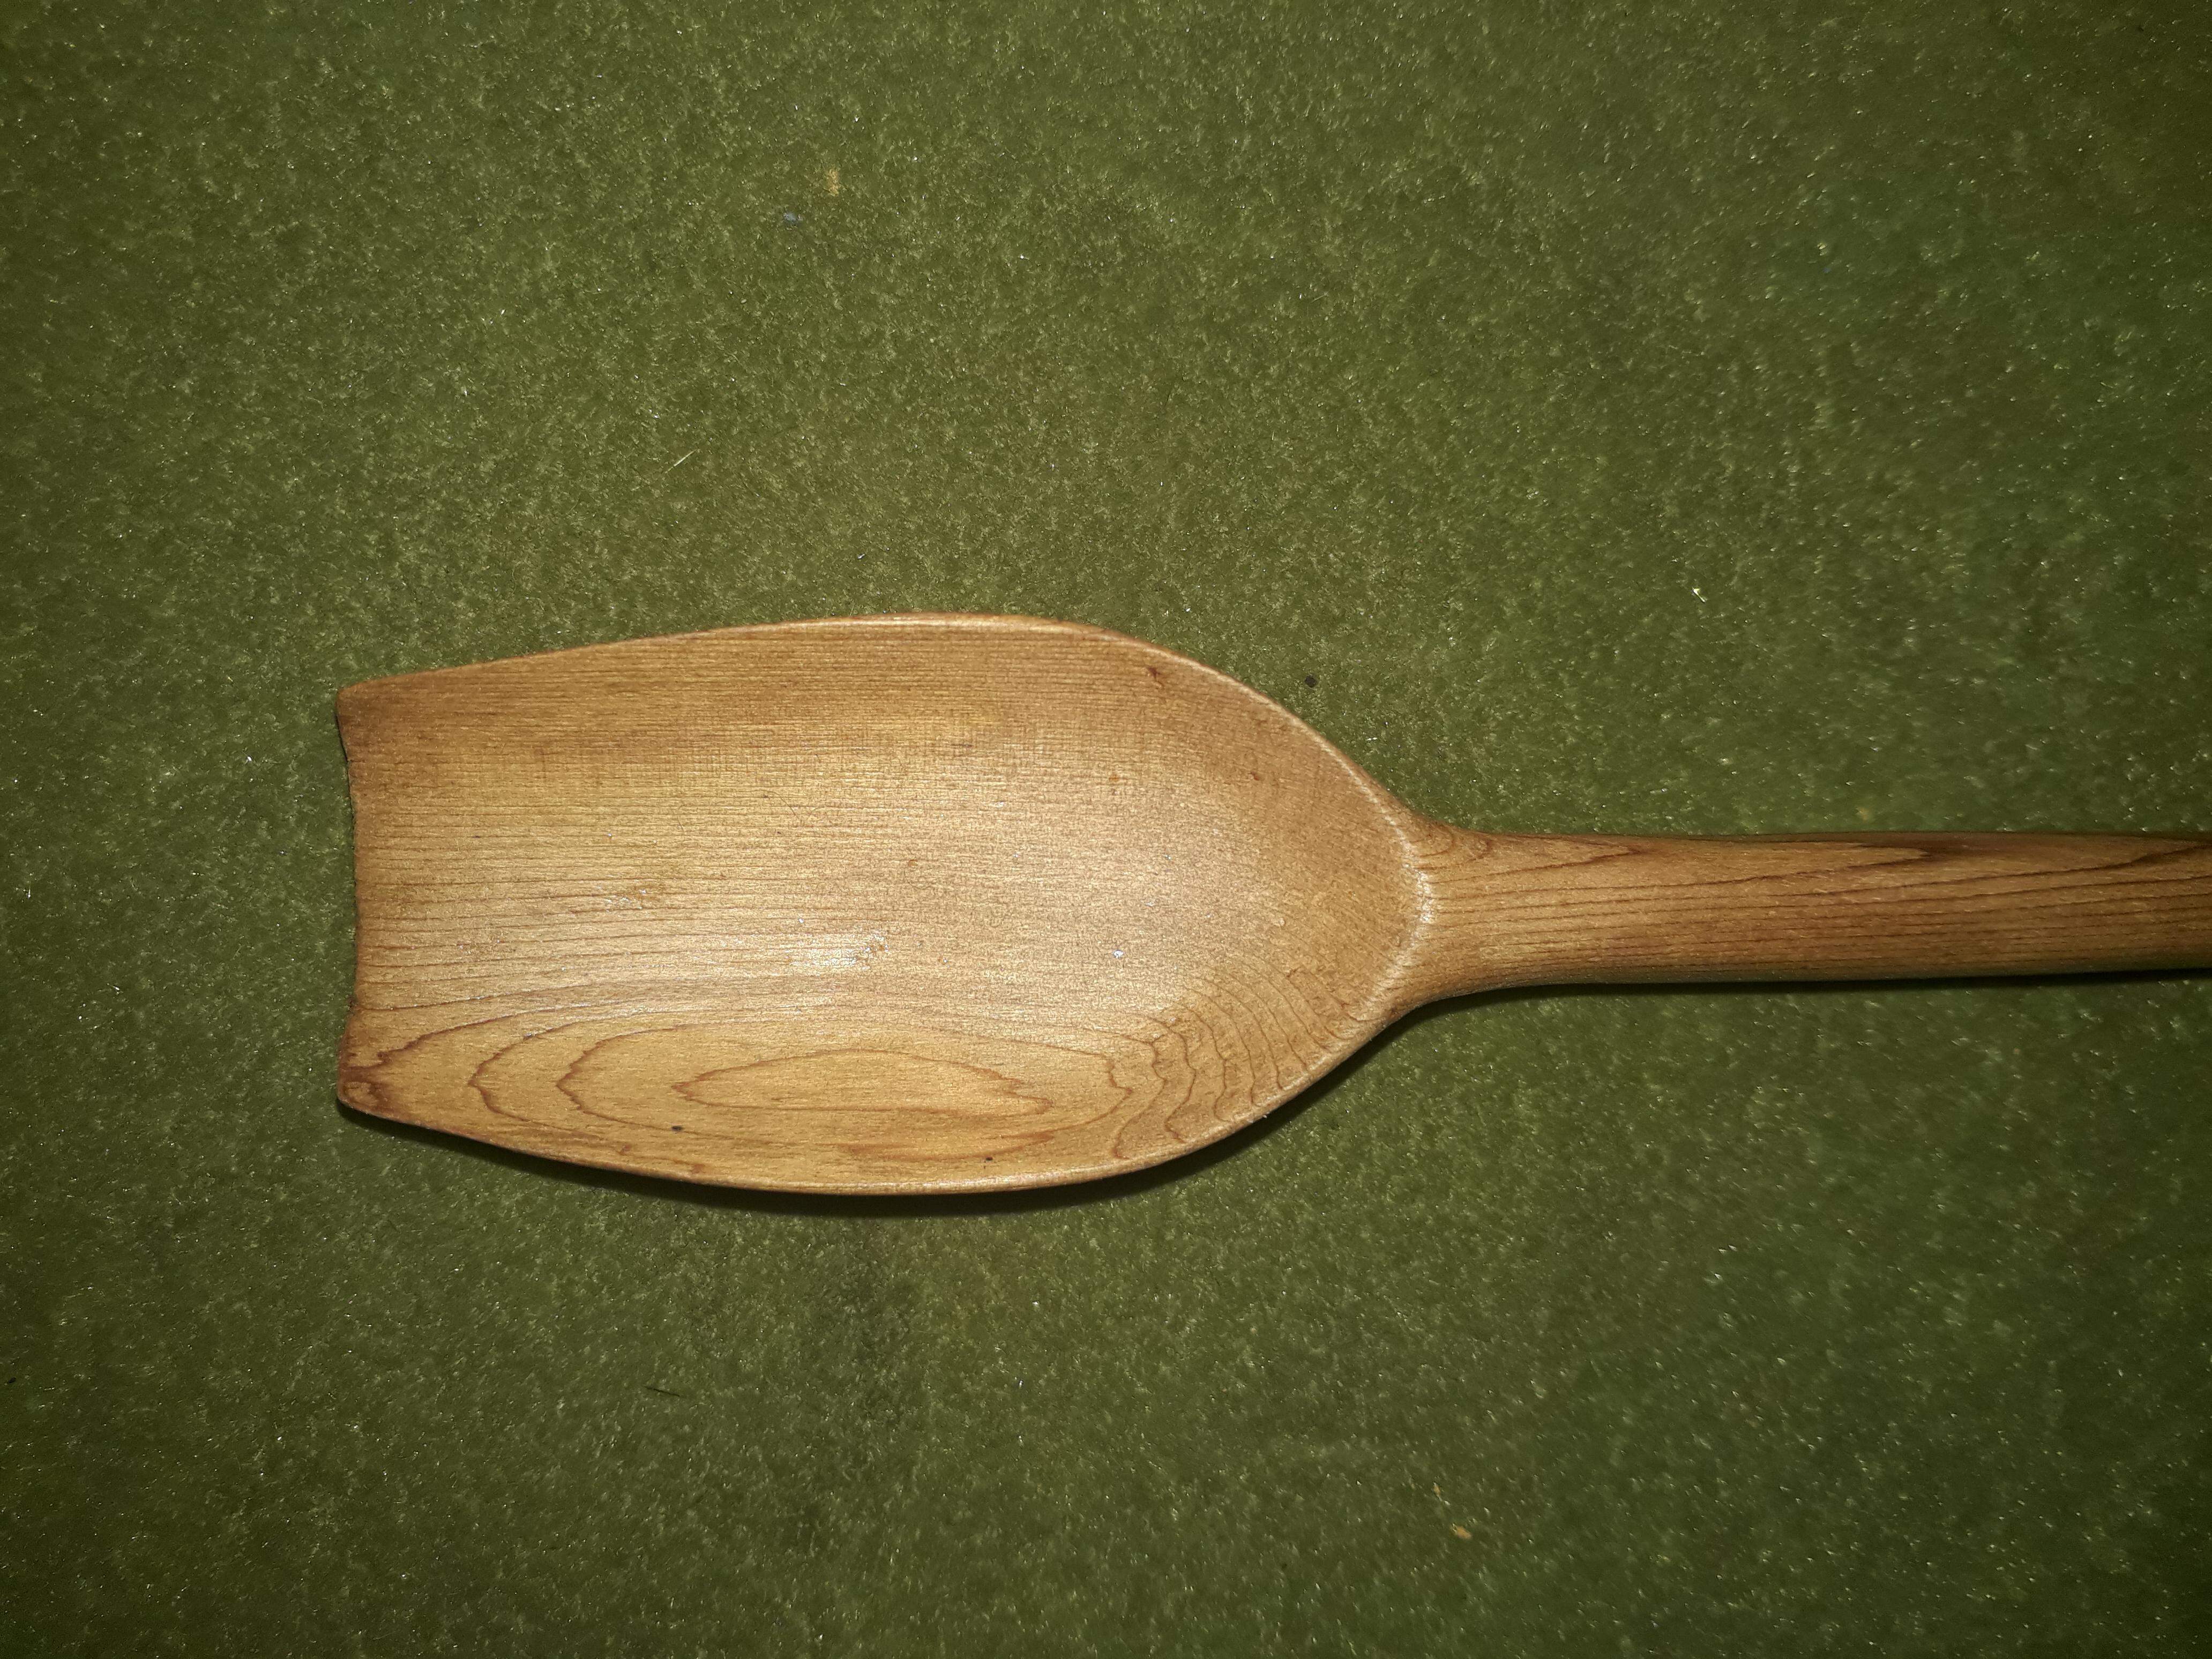 Small & large scoop shovel